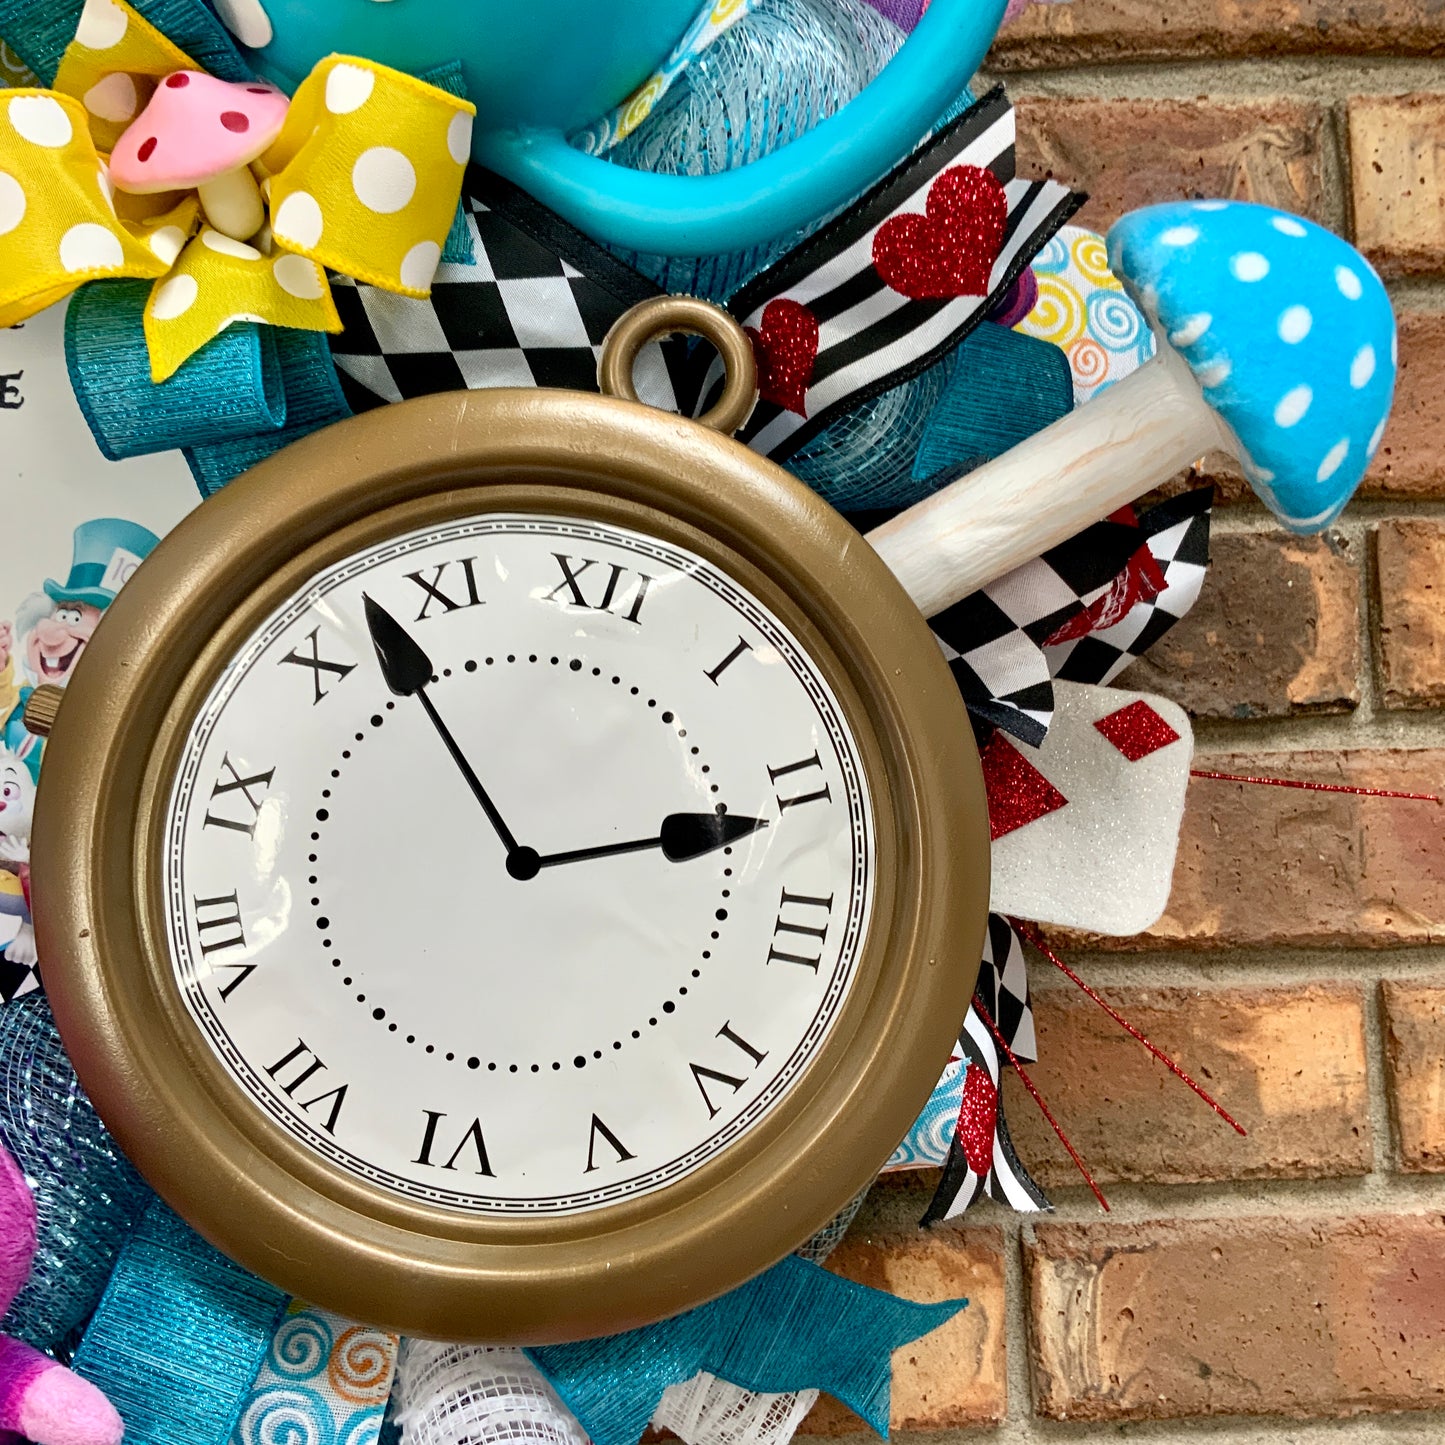 Alice In Wonderland Wreath, Cheshire Cat Wreath, We Are All Mad Here, Mad Hatter Wreath, Cheshire Cat Decor, Alice In Wonderland Decor, Queen Of Hearts Decor